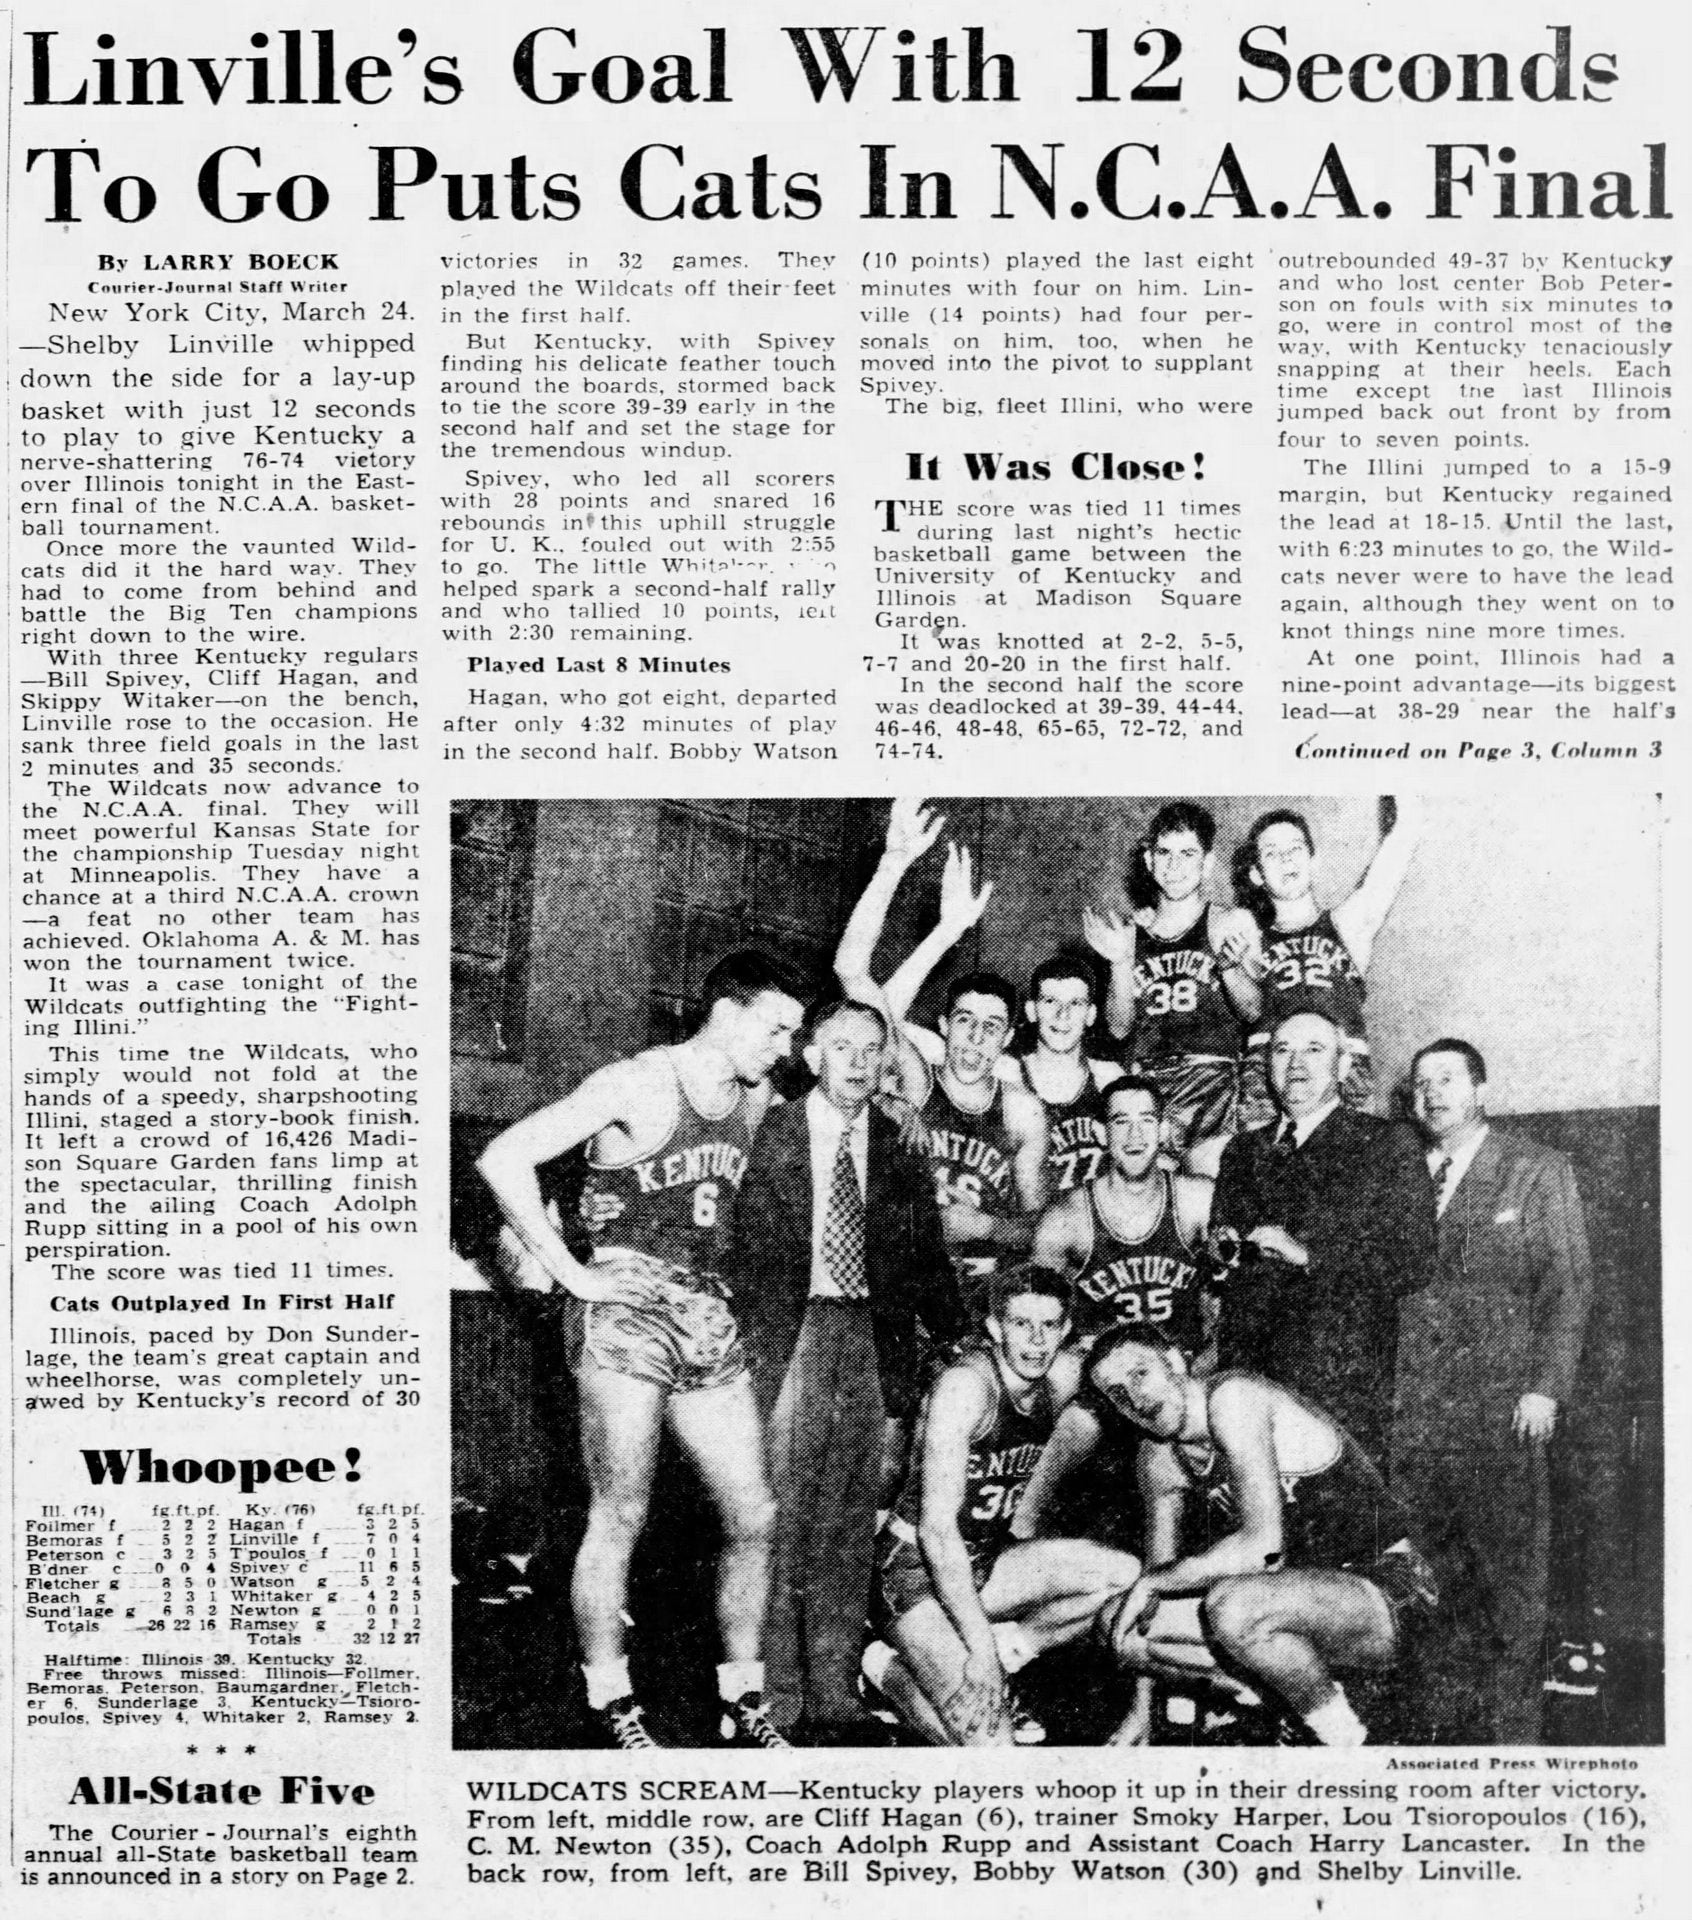 On March 24, 1951, Kentucky defeated Illinois in the 1951 NCAA Final Four behind Shelby Linville's game-winning basket.